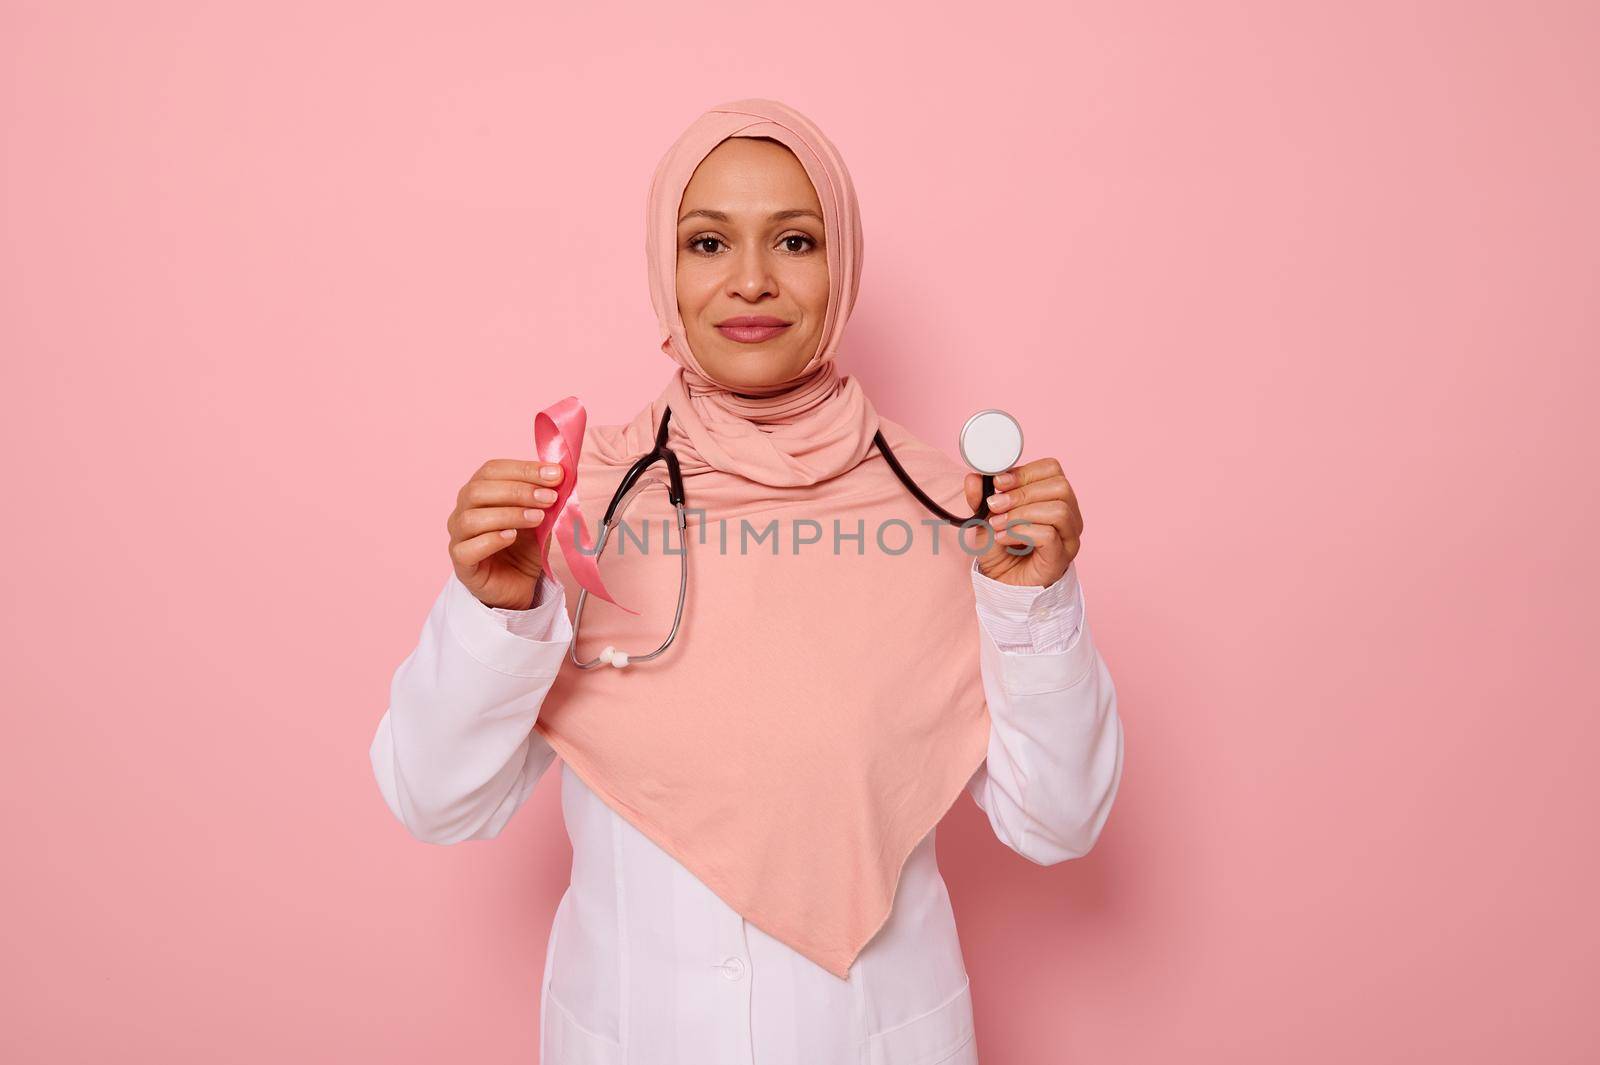 Portrait of Muslim Arab woman doctor with covered head in pink hijab, posing on colored background with a pink ribbon and stethoscope in hands, supporting cancer patients and survivors, 1 st October